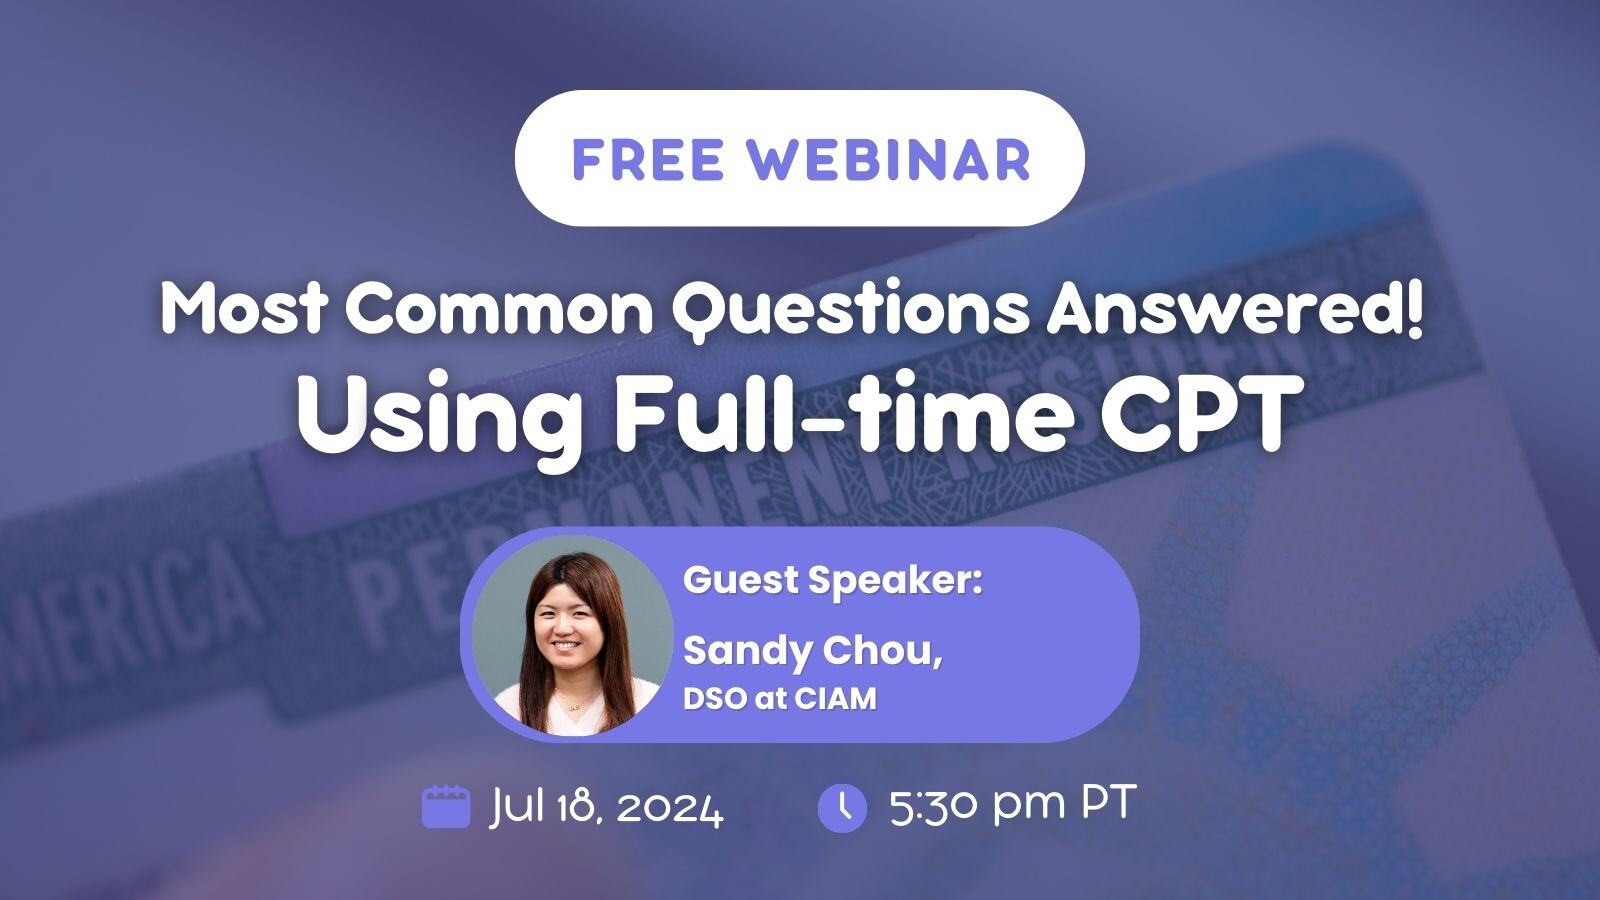 Most Common Questions Answered! for using Full-time CPT